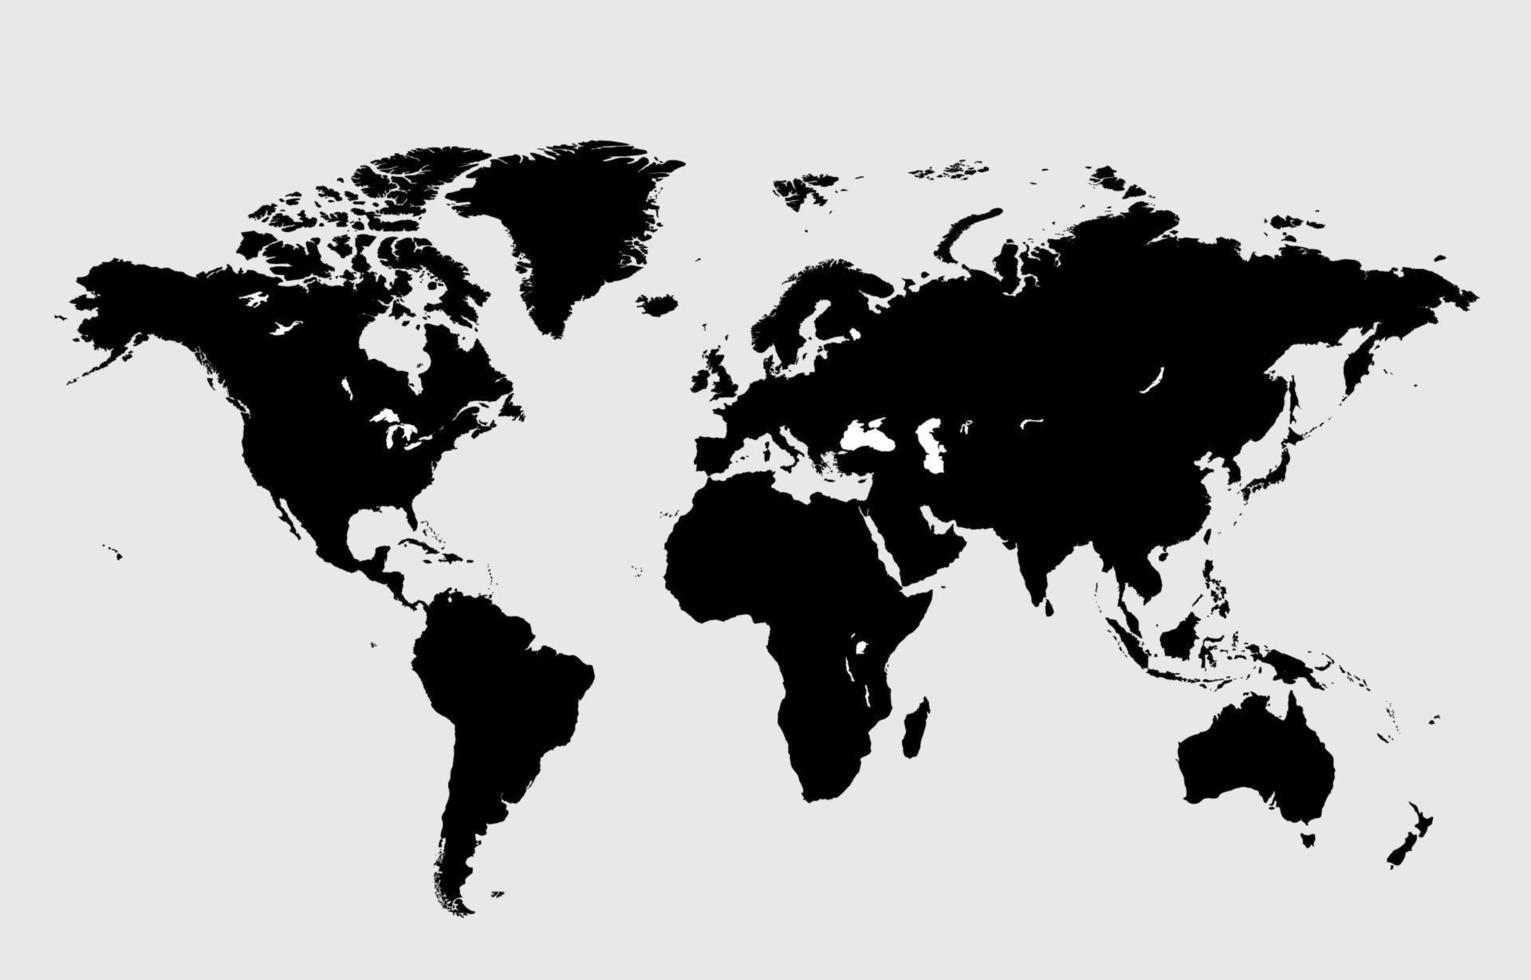 World Map Black and White vector